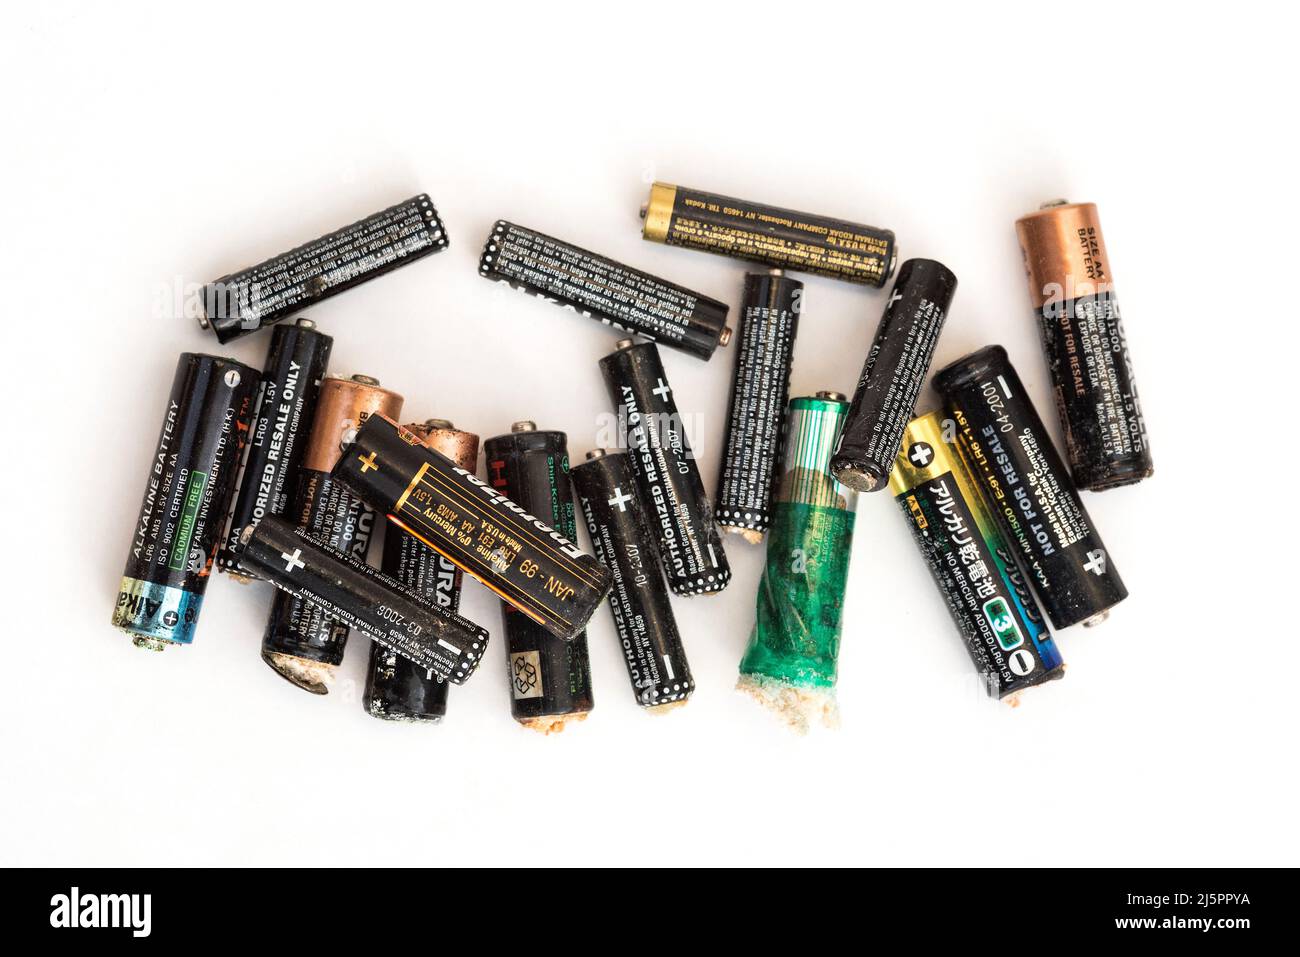 Corrosion of alkaline batteries. Environmental concern / recycling / safe disposal. Battery technology. Electric power storage. Stock Photo